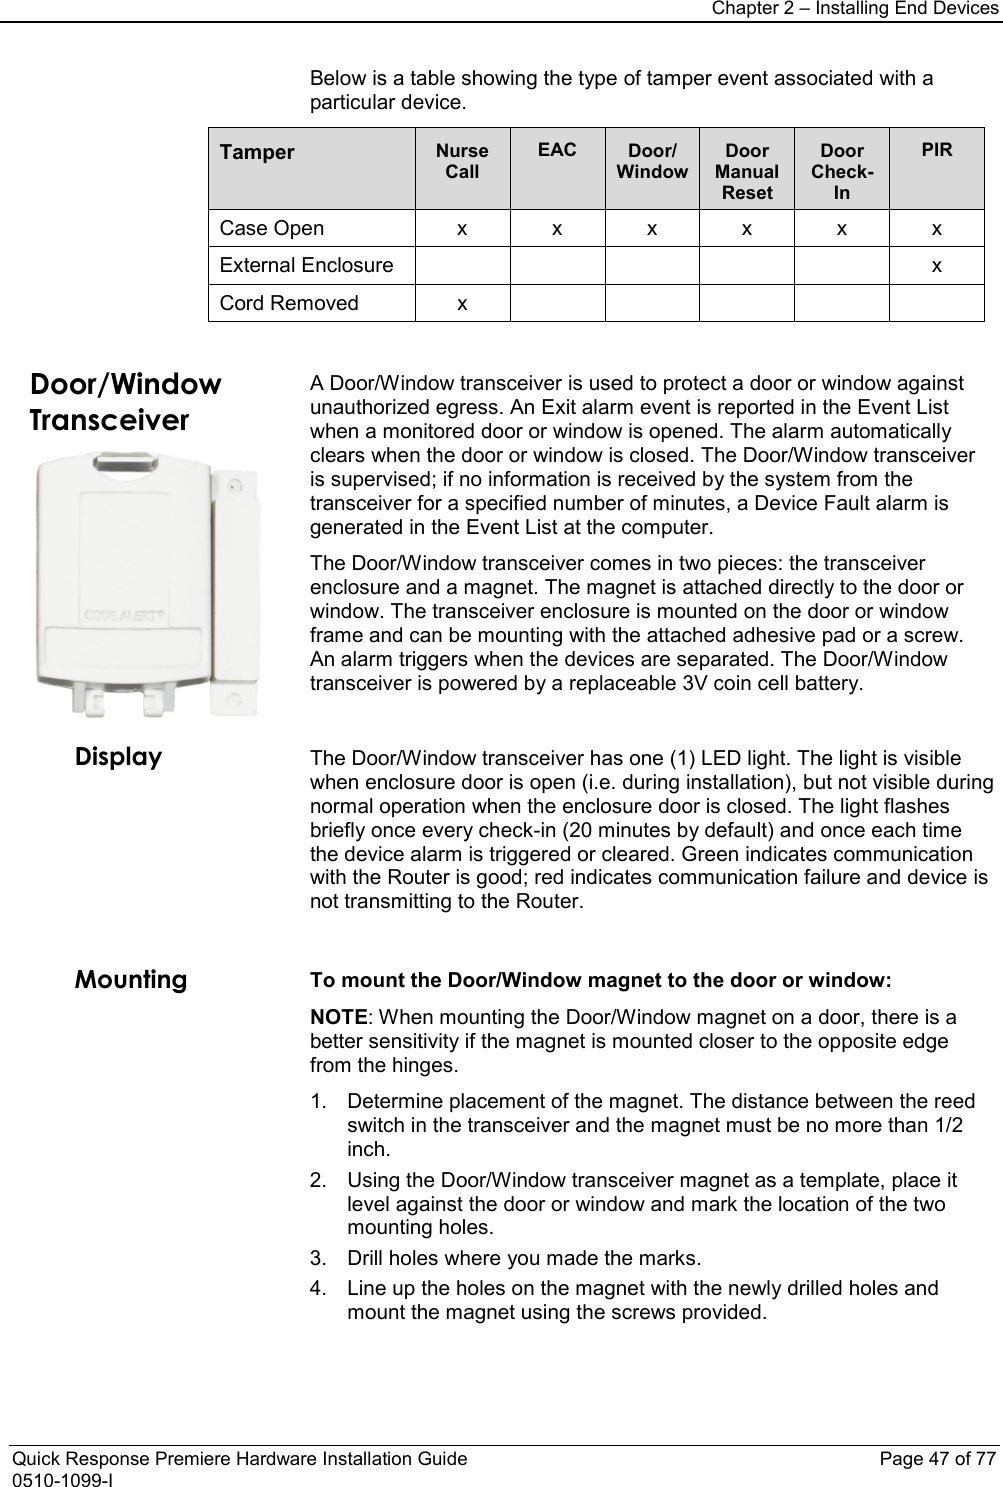 Chapter 2 – Installing End Devices  Quick Response Premiere Hardware Installation Guide    Page 47 of 77 0510-1099-I Below is a table showing the type of tamper event associated with a particular device.  Tamper Nurse Call EAC Door/ Window Door Manual Reset Door Check-In PIR Case Open  x  x  x  x  x  x External Enclosure            x Cord Removed  x               Door/Window Transceiver  A Door/Window transceiver is used to protect a door or window against unauthorized egress. An Exit alarm event is reported in the Event List when a monitored door or window is opened. The alarm automatically clears when the door or window is closed. The Door/Window transceiver is supervised; if no information is received by the system from the transceiver for a specified number of minutes, a Device Fault alarm is generated in the Event List at the computer. The Door/Window transceiver comes in two pieces: the transceiver enclosure and a magnet. The magnet is attached directly to the door or window. The transceiver enclosure is mounted on the door or window frame and can be mounting with the attached adhesive pad or a screw. An alarm triggers when the devices are separated. The Door/Window transceiver is powered by a replaceable 3V coin cell battery. Display The Door/Window transceiver has one (1) LED light. The light is visible when enclosure door is open (i.e. during installation), but not visible during normal operation when the enclosure door is closed. The light flashes briefly once every check-in (20 minutes by default) and once each time the device alarm is triggered or cleared. Green indicates communication with the Router is good; red indicates communication failure and device is not transmitting to the Router.  Mounting To mount the Door/Window magnet to the door or window: NOTE: When mounting the Door/Window magnet on a door, there is a better sensitivity if the magnet is mounted closer to the opposite edge from the hinges. 1. Determine placement of the magnet. The distance between the reed switch in the transceiver and the magnet must be no more than 1/2 inch. 2. Using the Door/Window transceiver magnet as a template, place it level against the door or window and mark the location of the two mounting holes. 3. Drill holes where you made the marks. 4. Line up the holes on the magnet with the newly drilled holes and mount the magnet using the screws provided.  